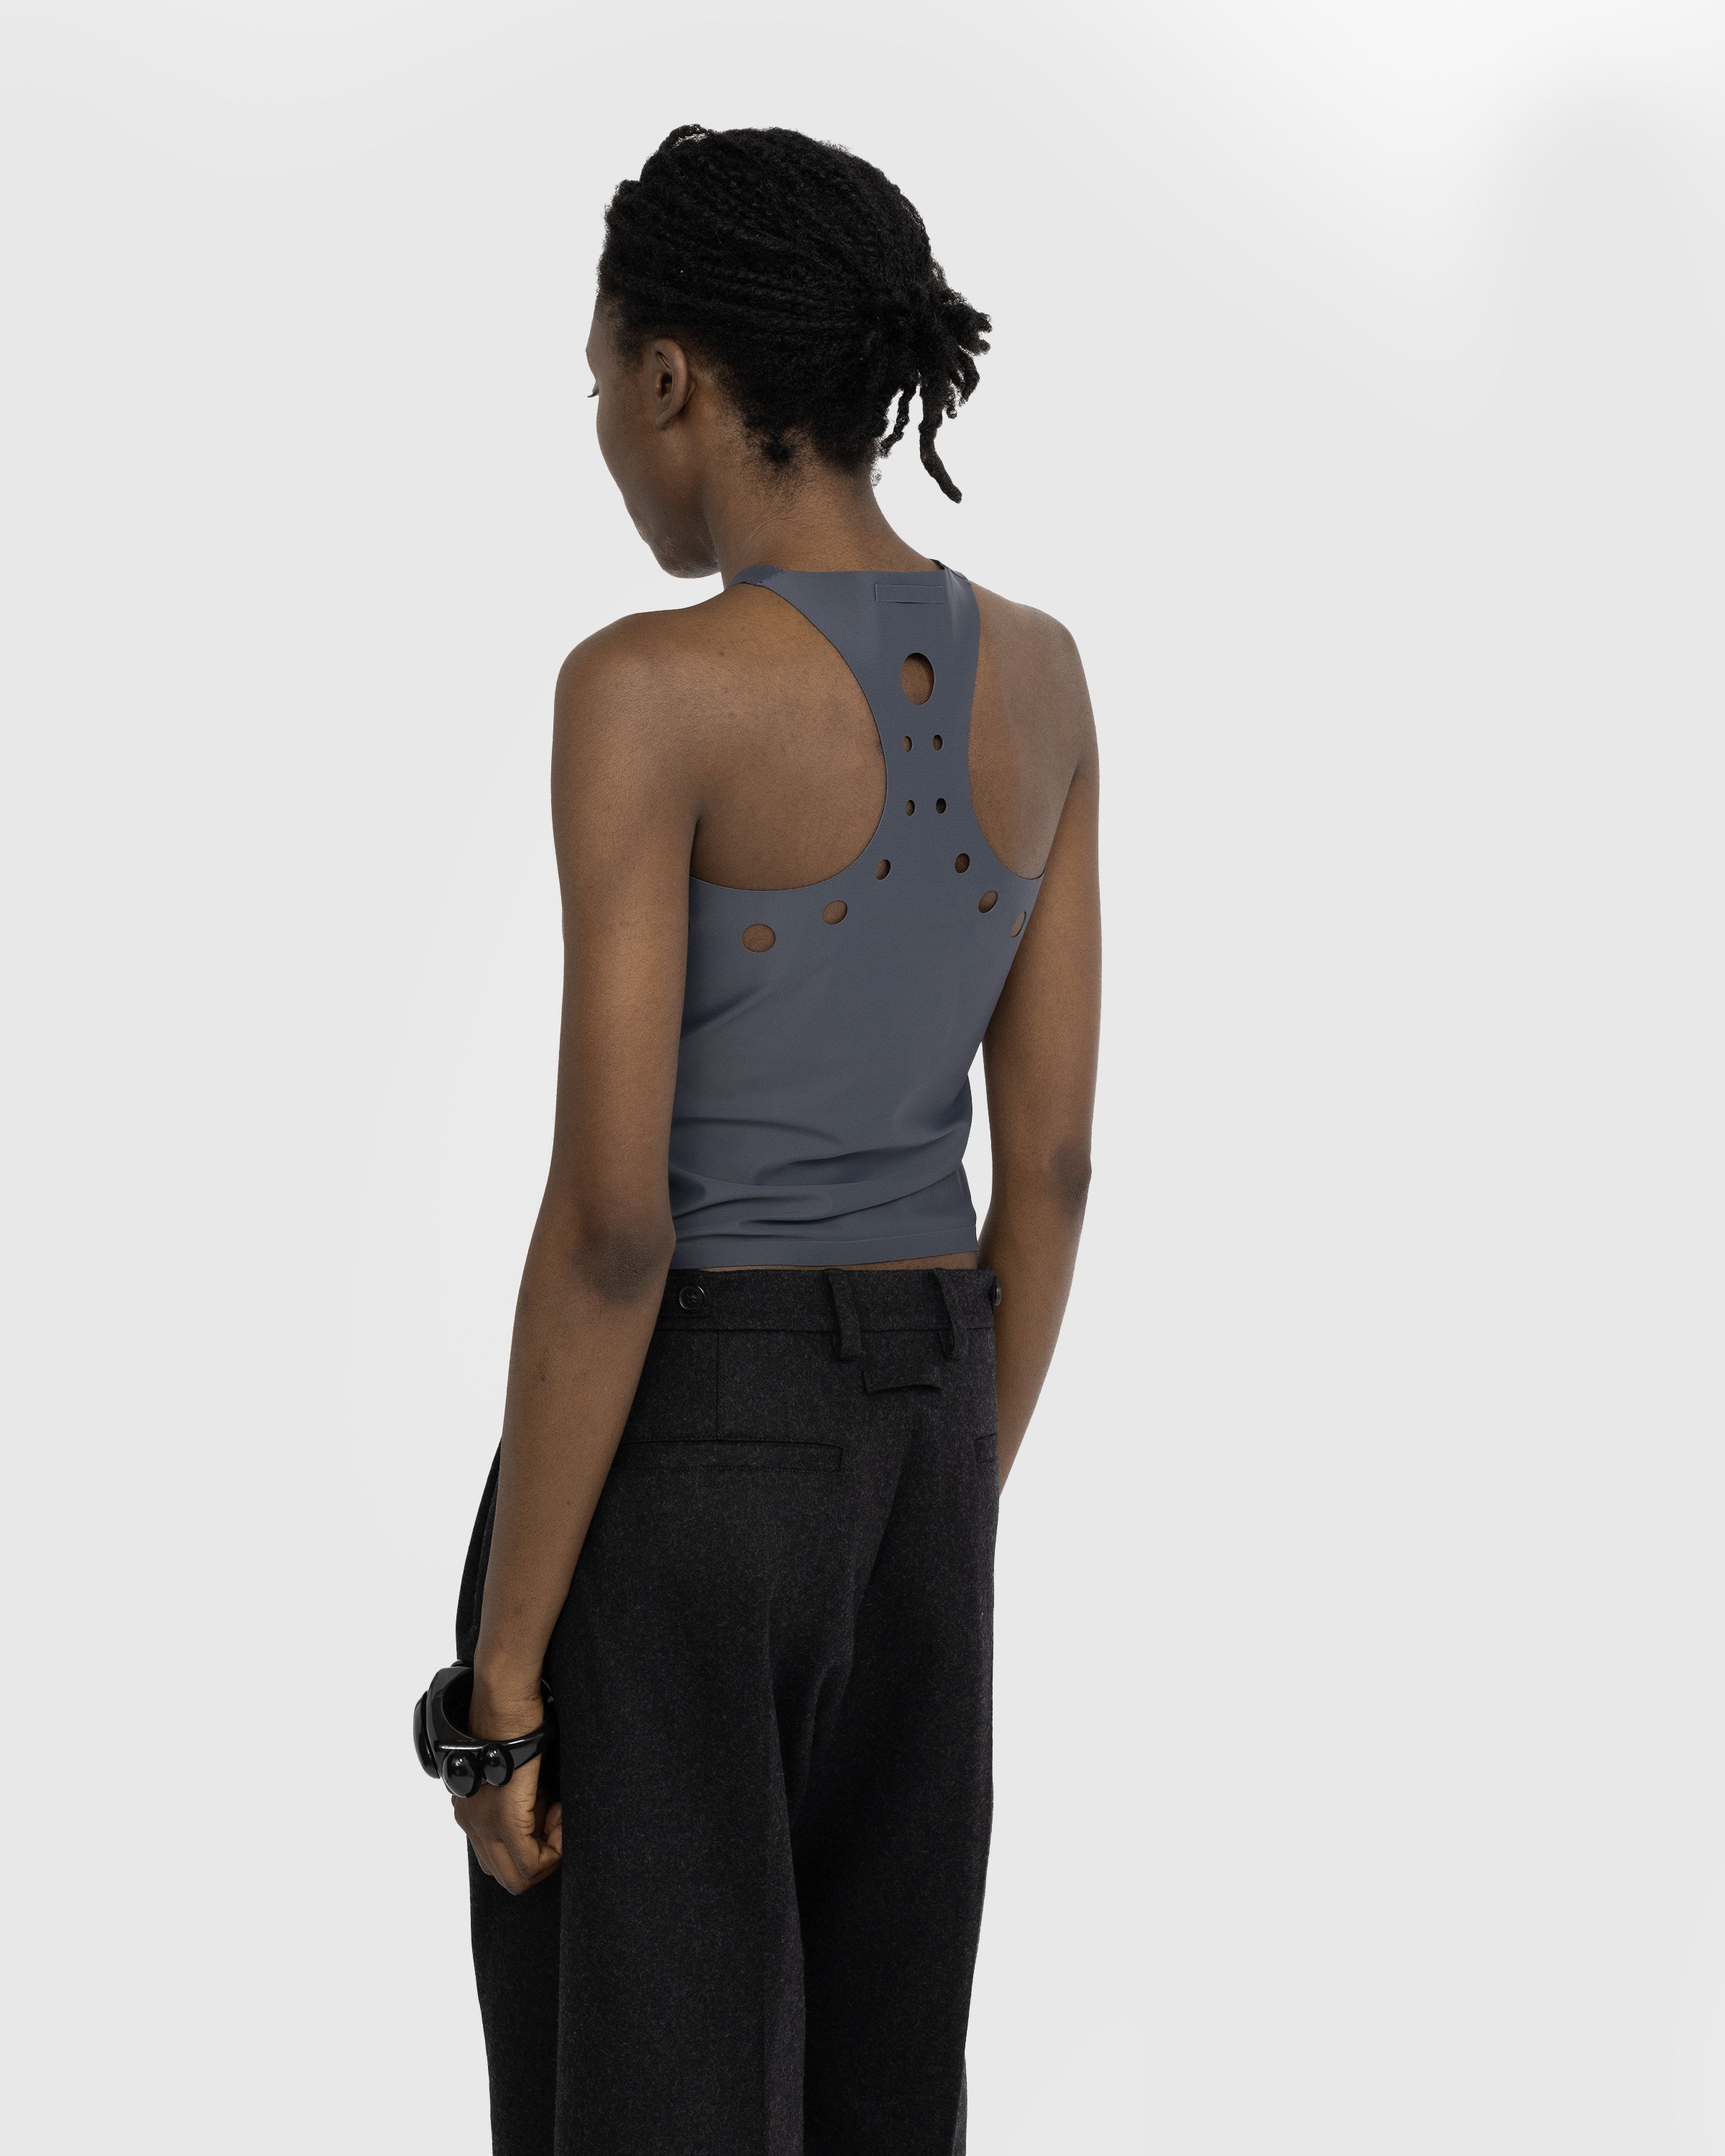 Jean Paul Gaultier - Perforated Details Tanktop - Clothing - Grey - Image 3